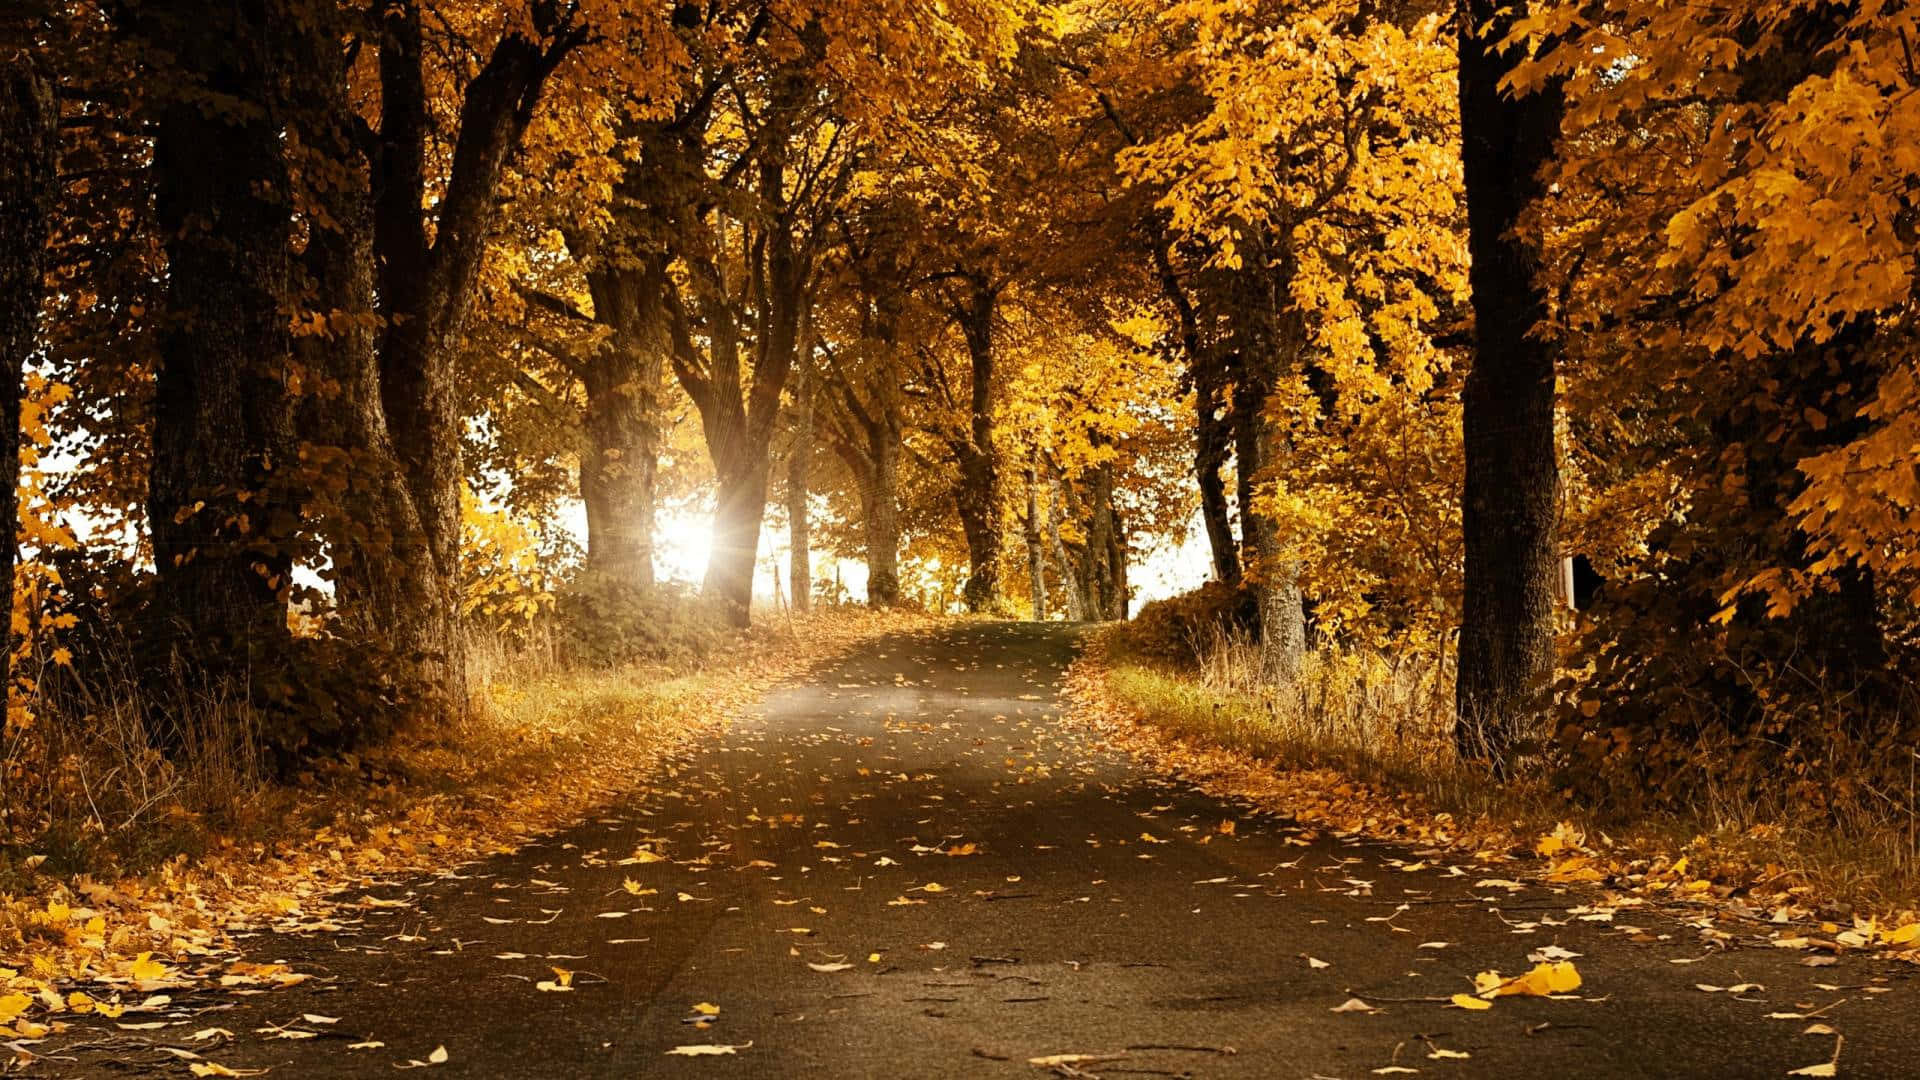 Enjoy the Perfect Fall with this stunning landscape of trees Wallpaper